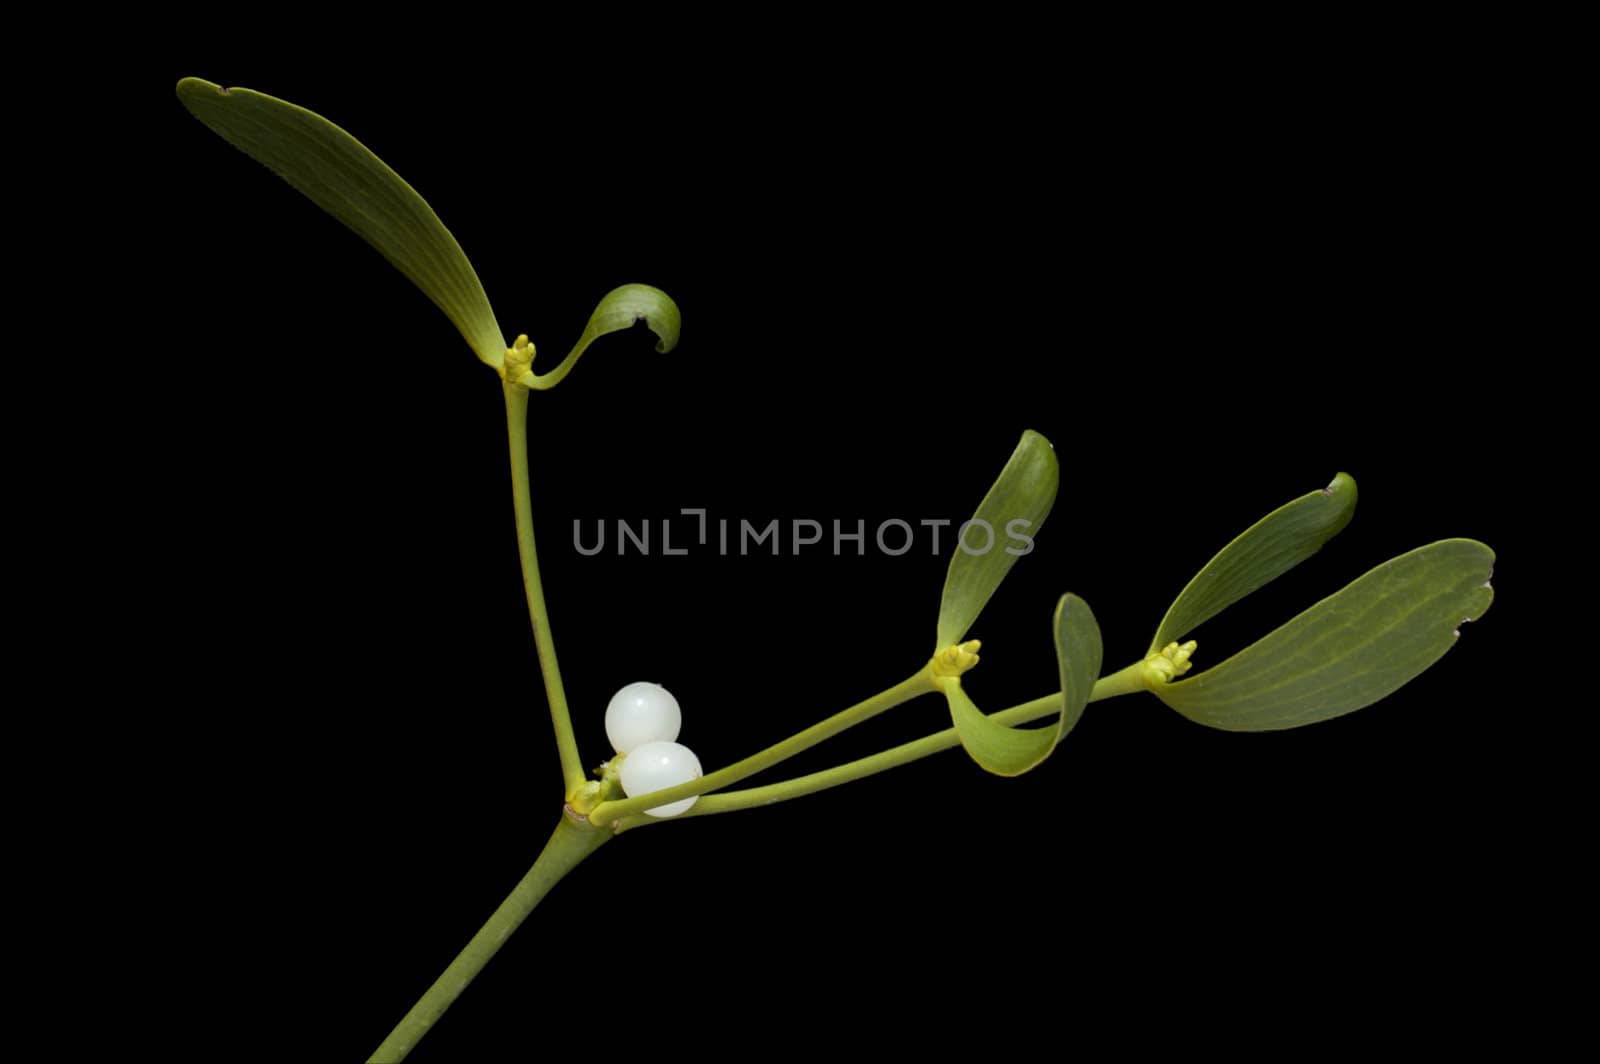 Close-up of a branch of mistletoe (Viscum album) with berries, isolated on a black background